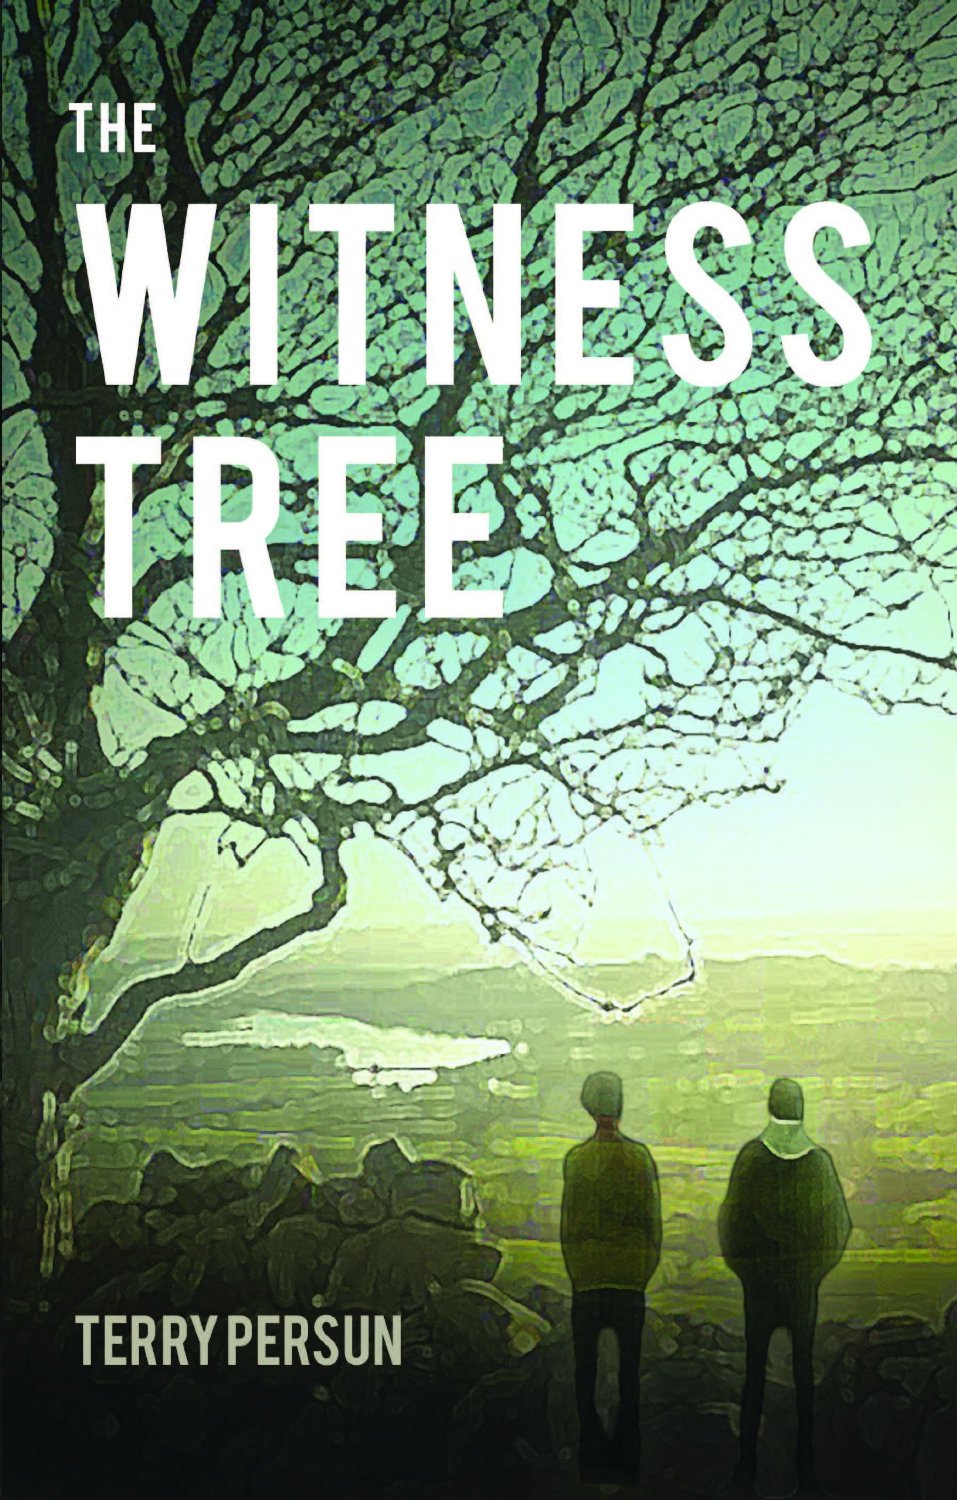 "The Witness Tree" (book cover)